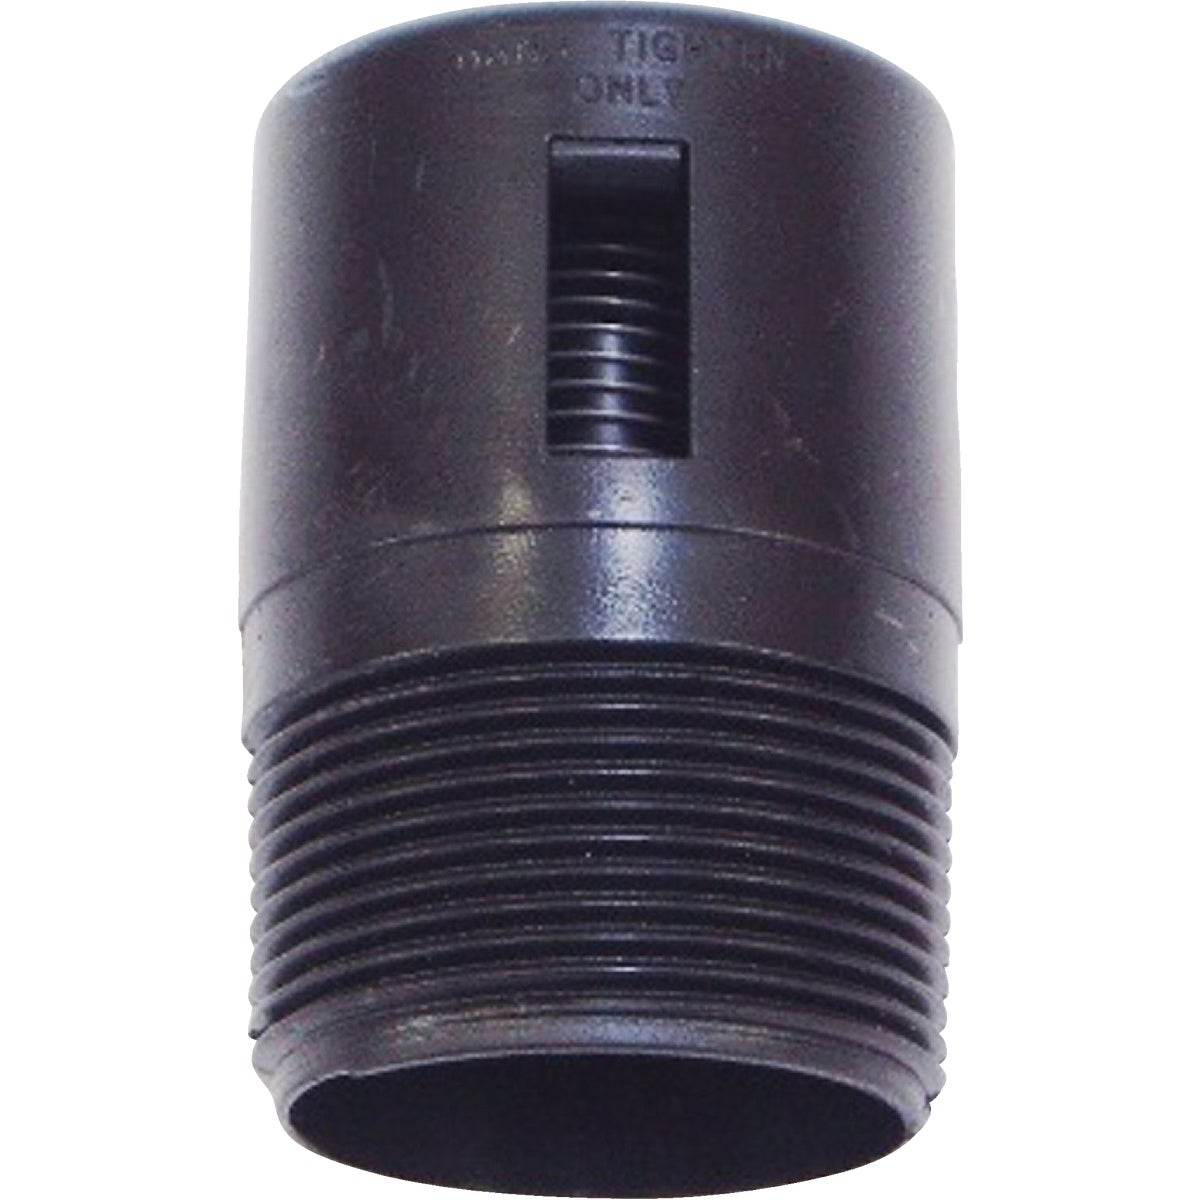 United States Hardware 1-7/8 In. MPT ABS Vent Valve